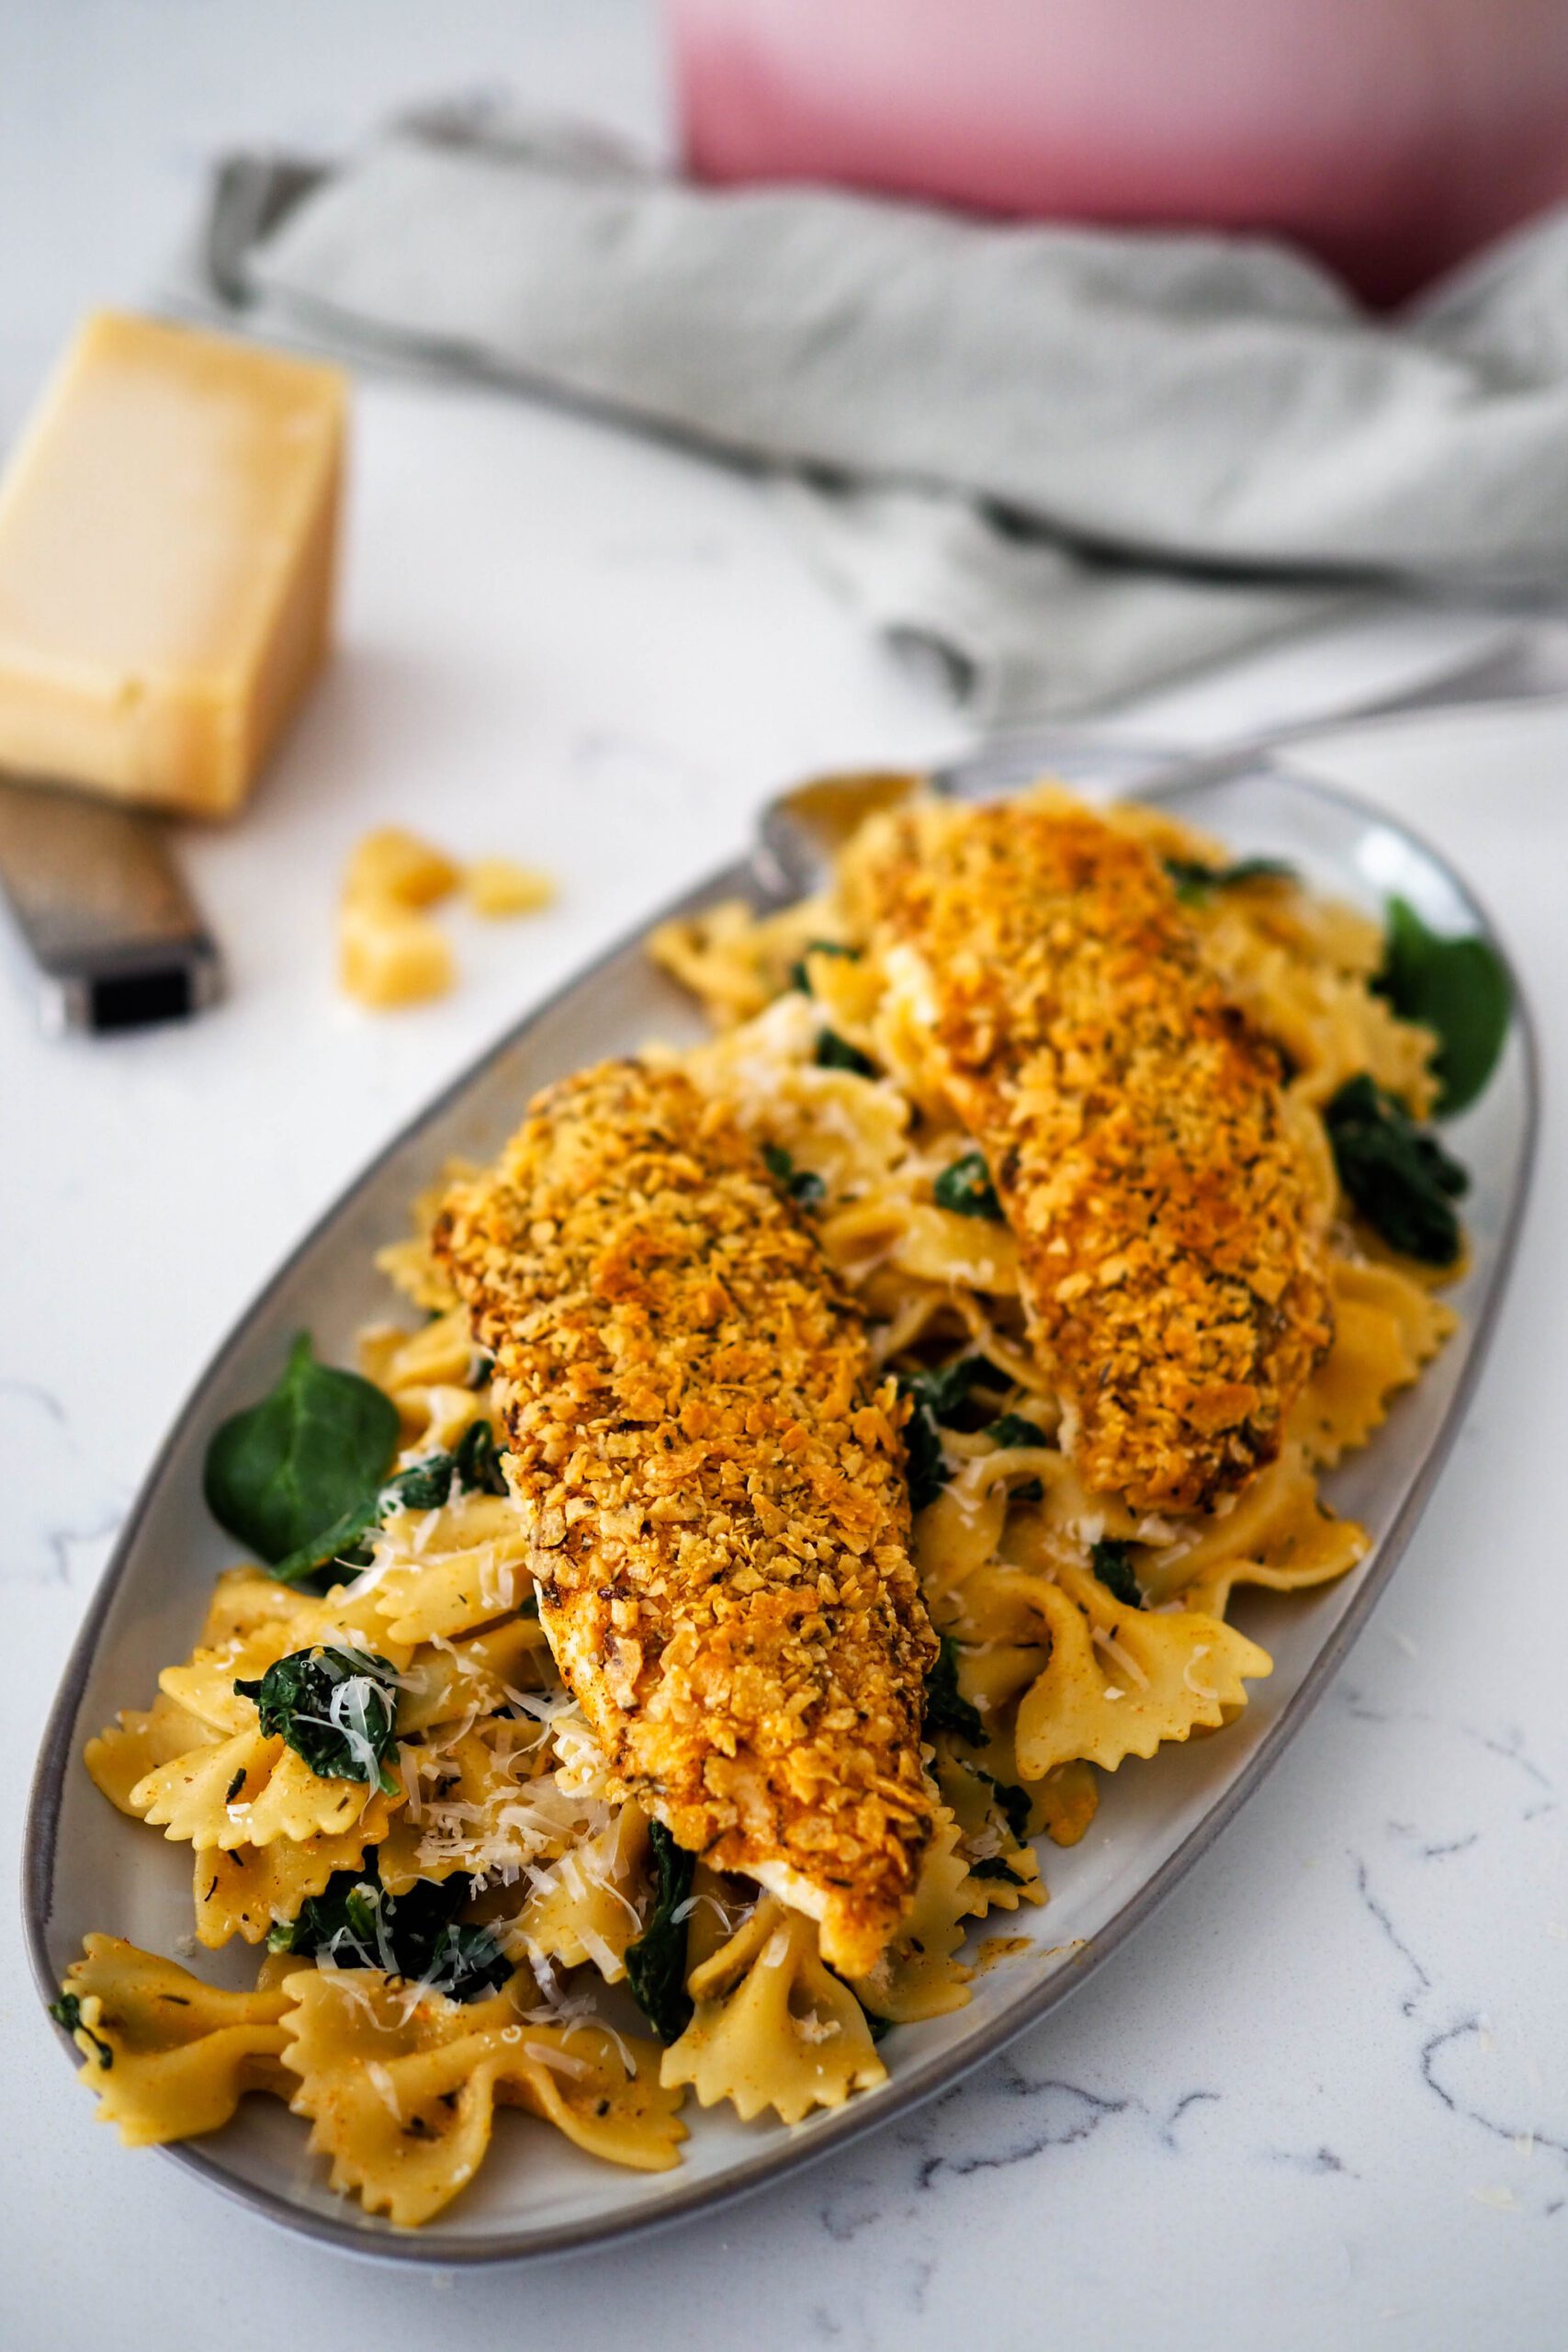 Two breaded tilapia filets on top of a pile of Cajun pasta and spinach.